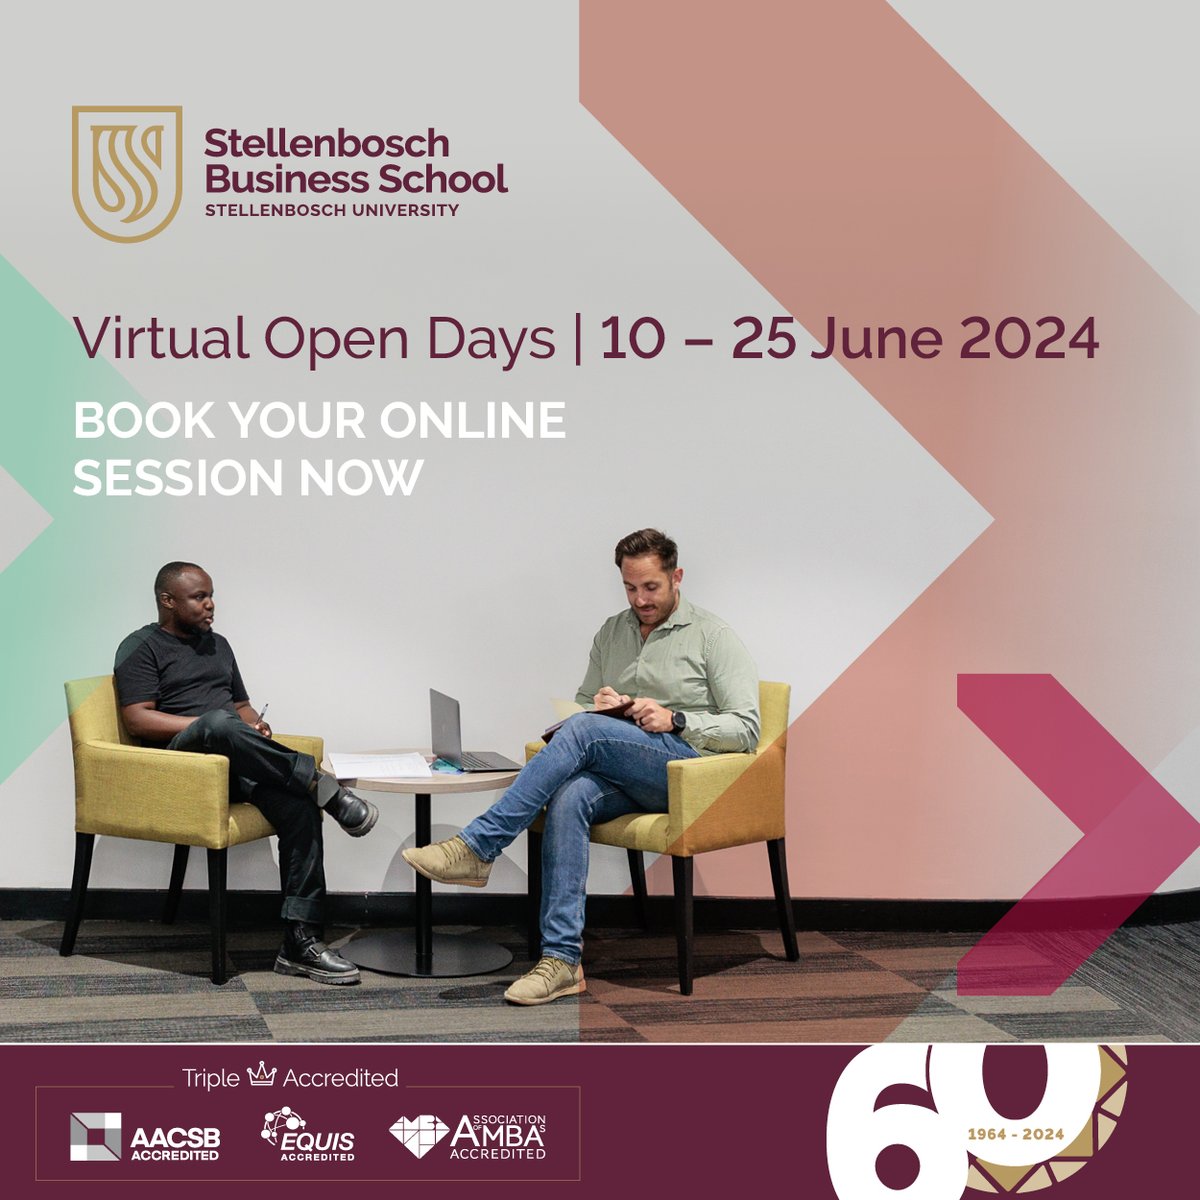 Do you know what's next on your academic journey? Join one of our Virtual Open Days for an immersive programme session: bit.ly/4dWhQ1g Discover our diverse range of programs, delve into campus life and explore your programme of interest. #VirtualOpenDays2024